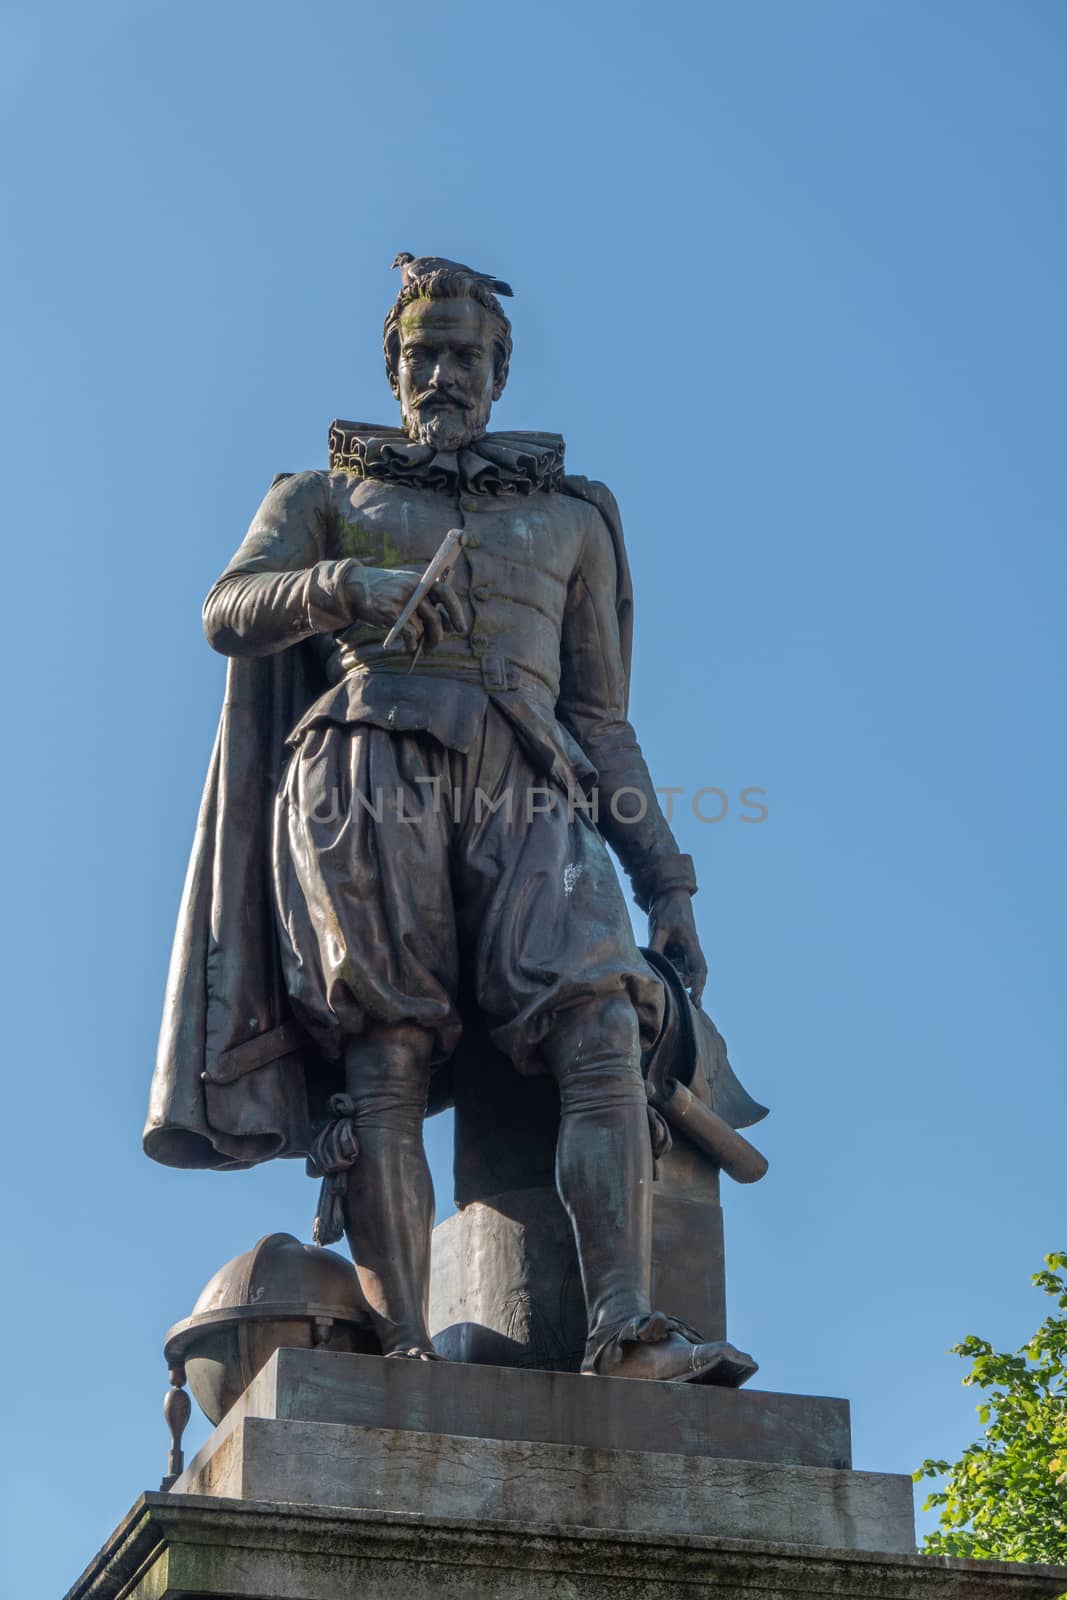 Bruges, Flanders, Belgium -  June 17, 2019: Closeup of Simon Stevin statue under blue sky. Some green foliage. Pigeon on his head.